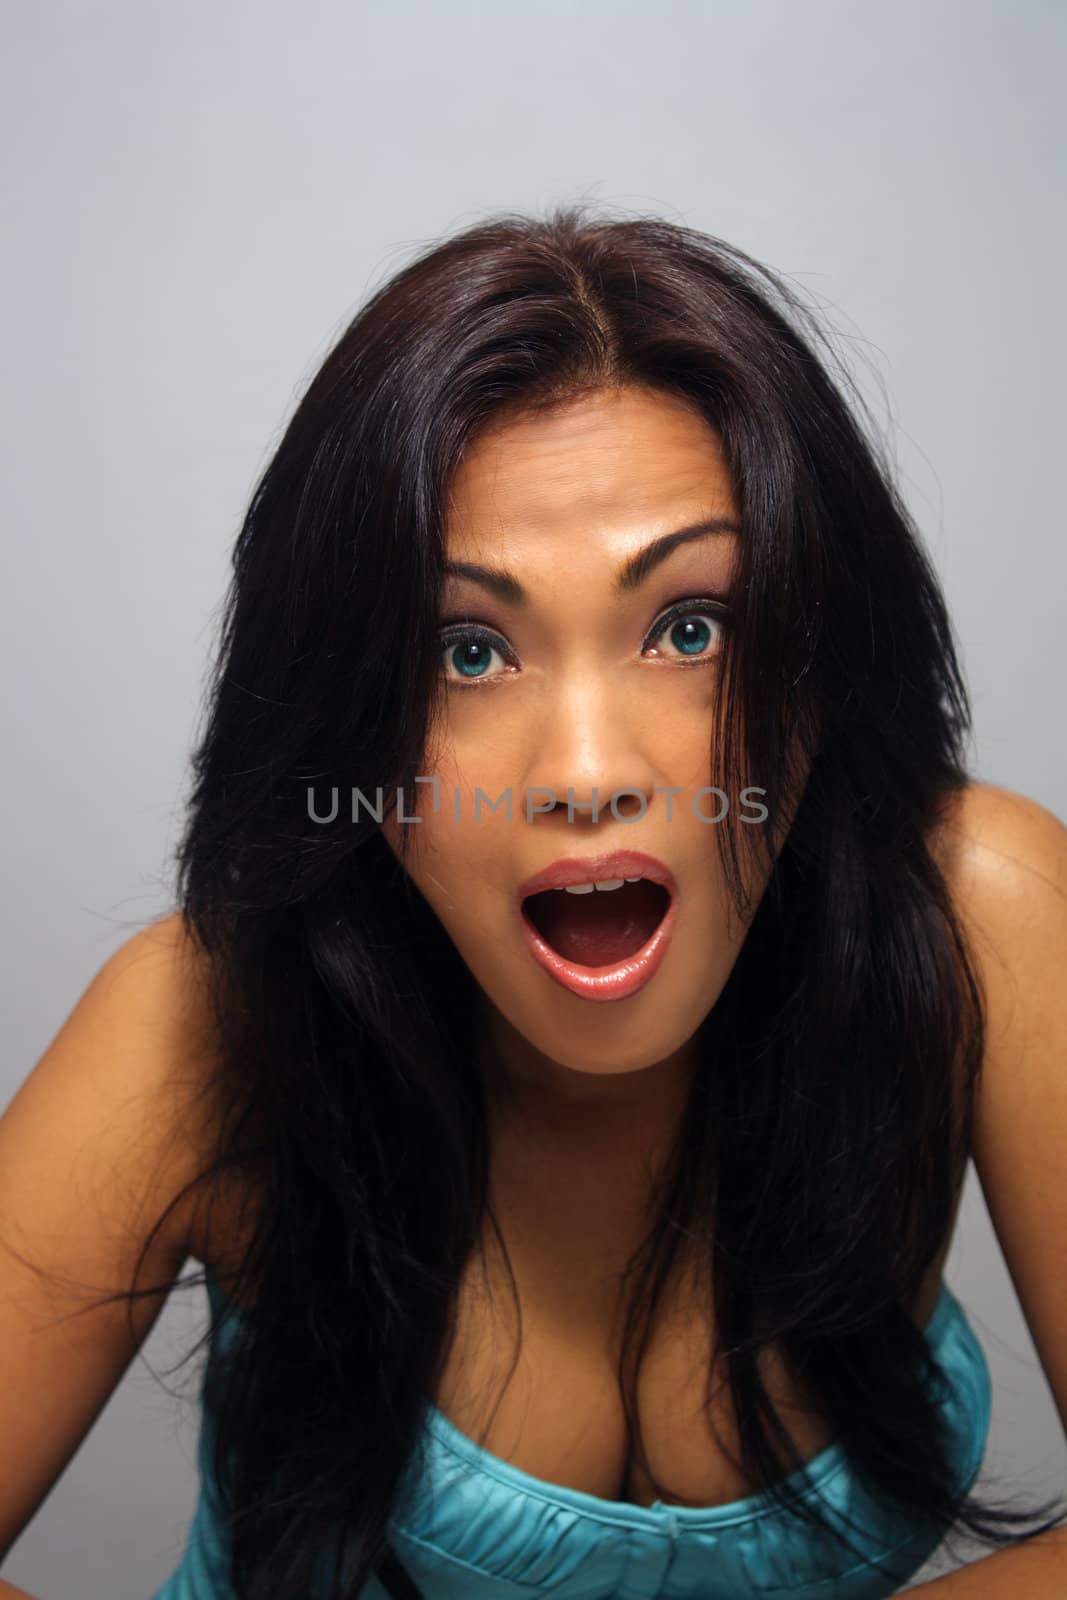 Beautiful Shocked Asian Girl by csproductions